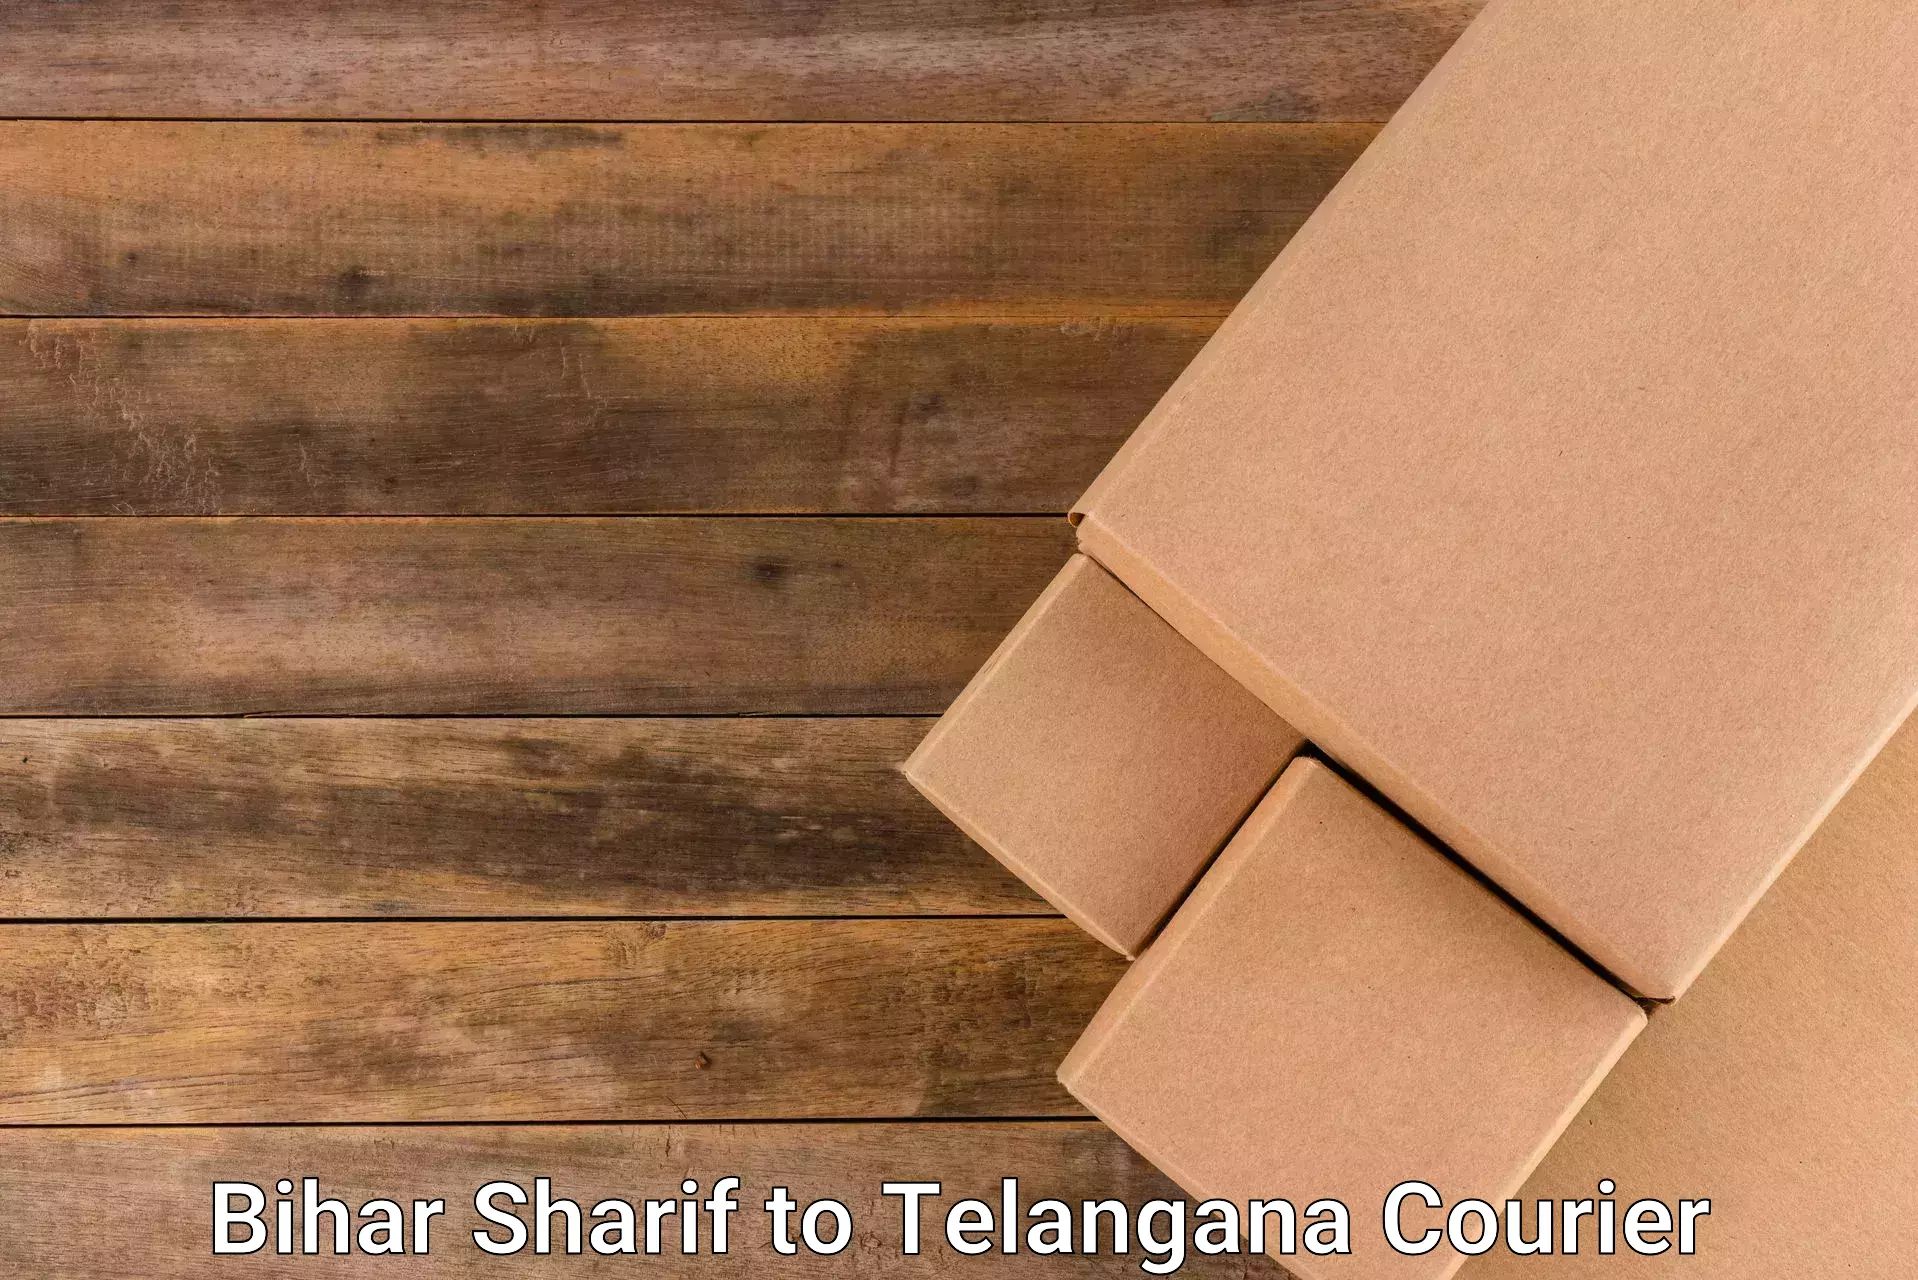 End-to-end delivery Bihar Sharif to Telangana